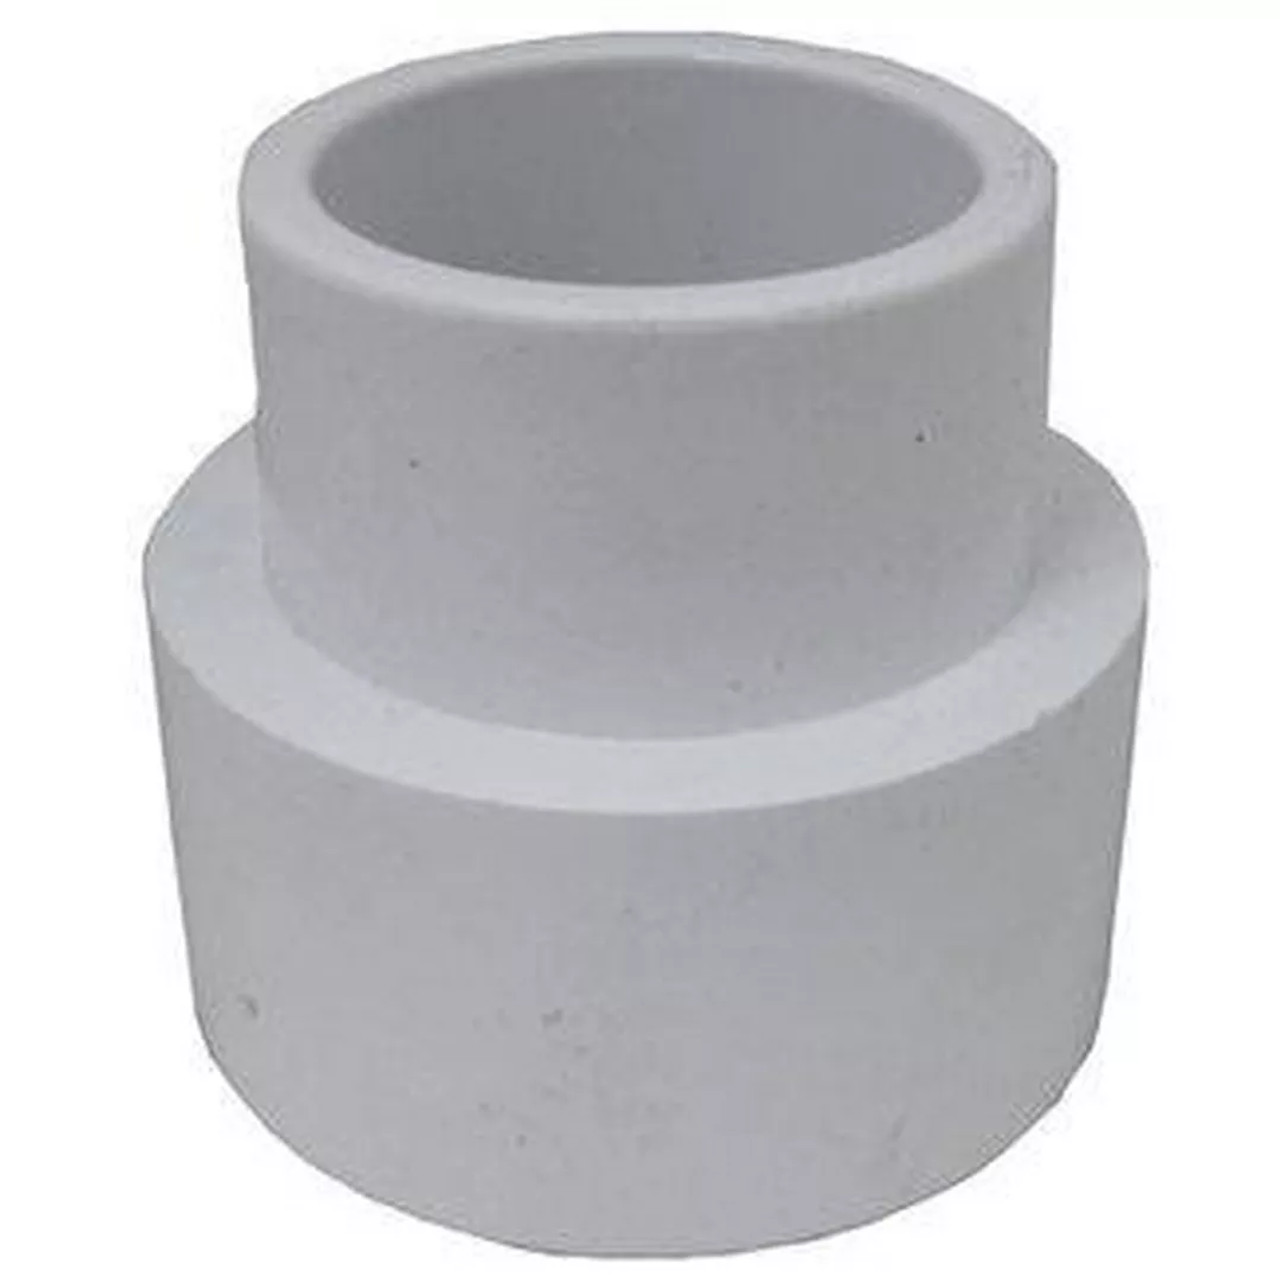 2.5", PVC, Pipe, Extender, Fitting, schedule, sch, 40, SP0301-25, 21182-250-000, ,-PACK, 21181-250-000, 0301-25 , 418-7000 , 901482 , SPG-56-0076, CMP, Custom Molded Products, swimming, Pool, 849640000656